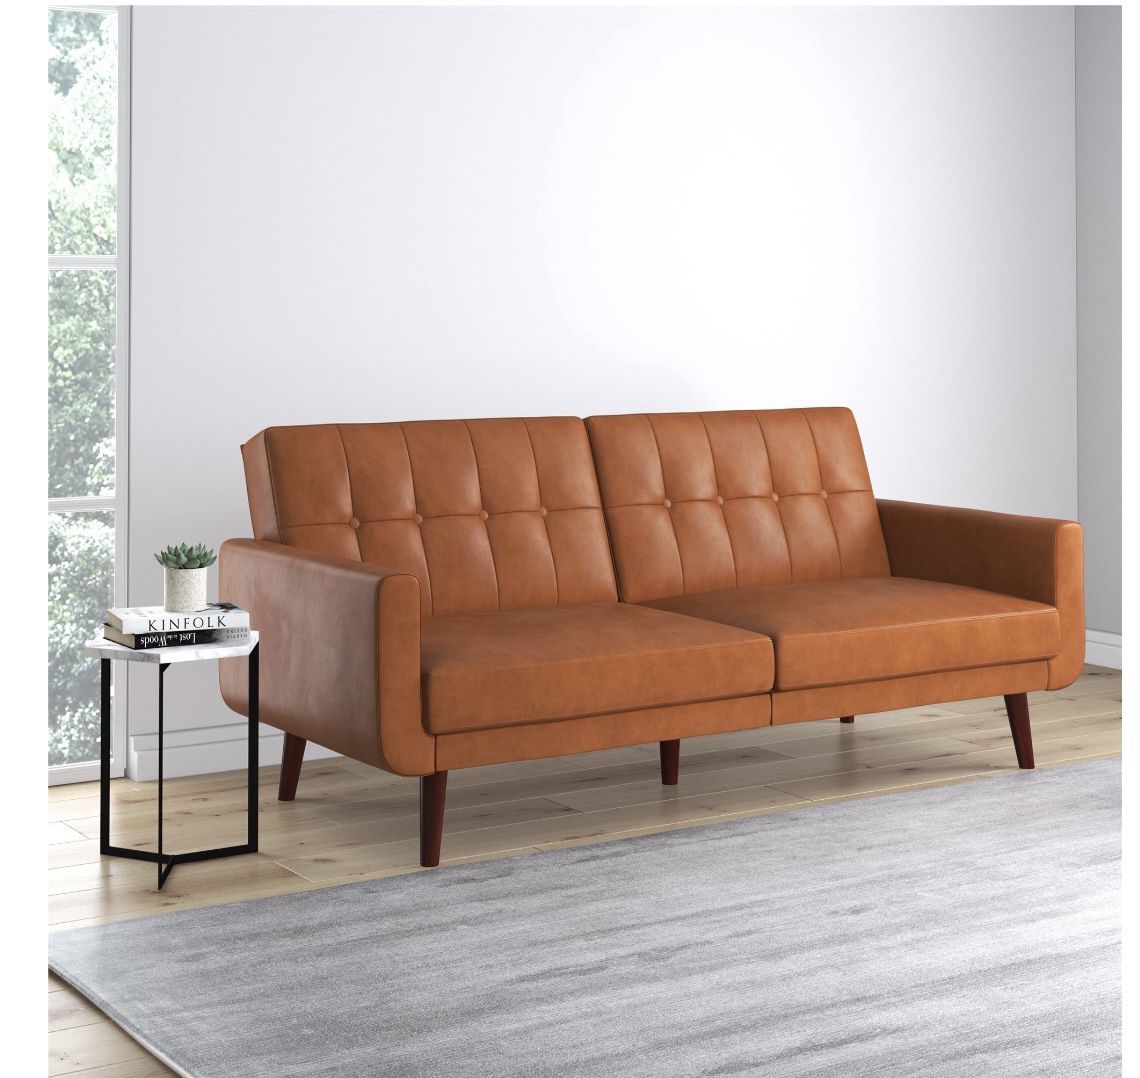 Leather Futon (reduced Price For Detail)